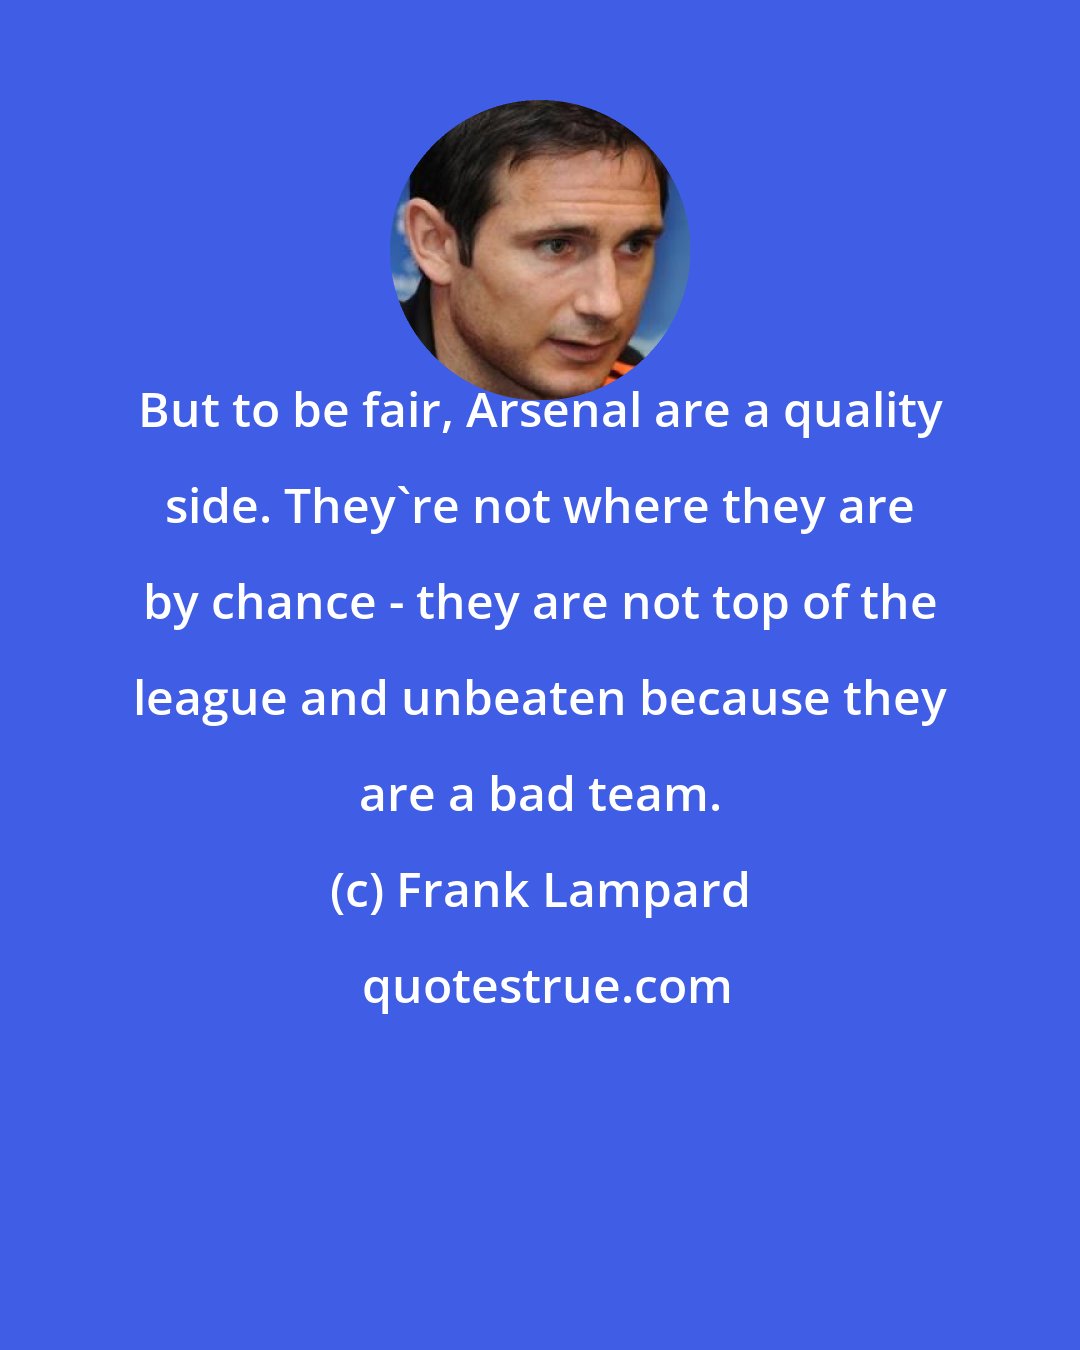 Frank Lampard: But to be fair, Arsenal are a quality side. They're not where they are by chance - they are not top of the league and unbeaten because they are a bad team.